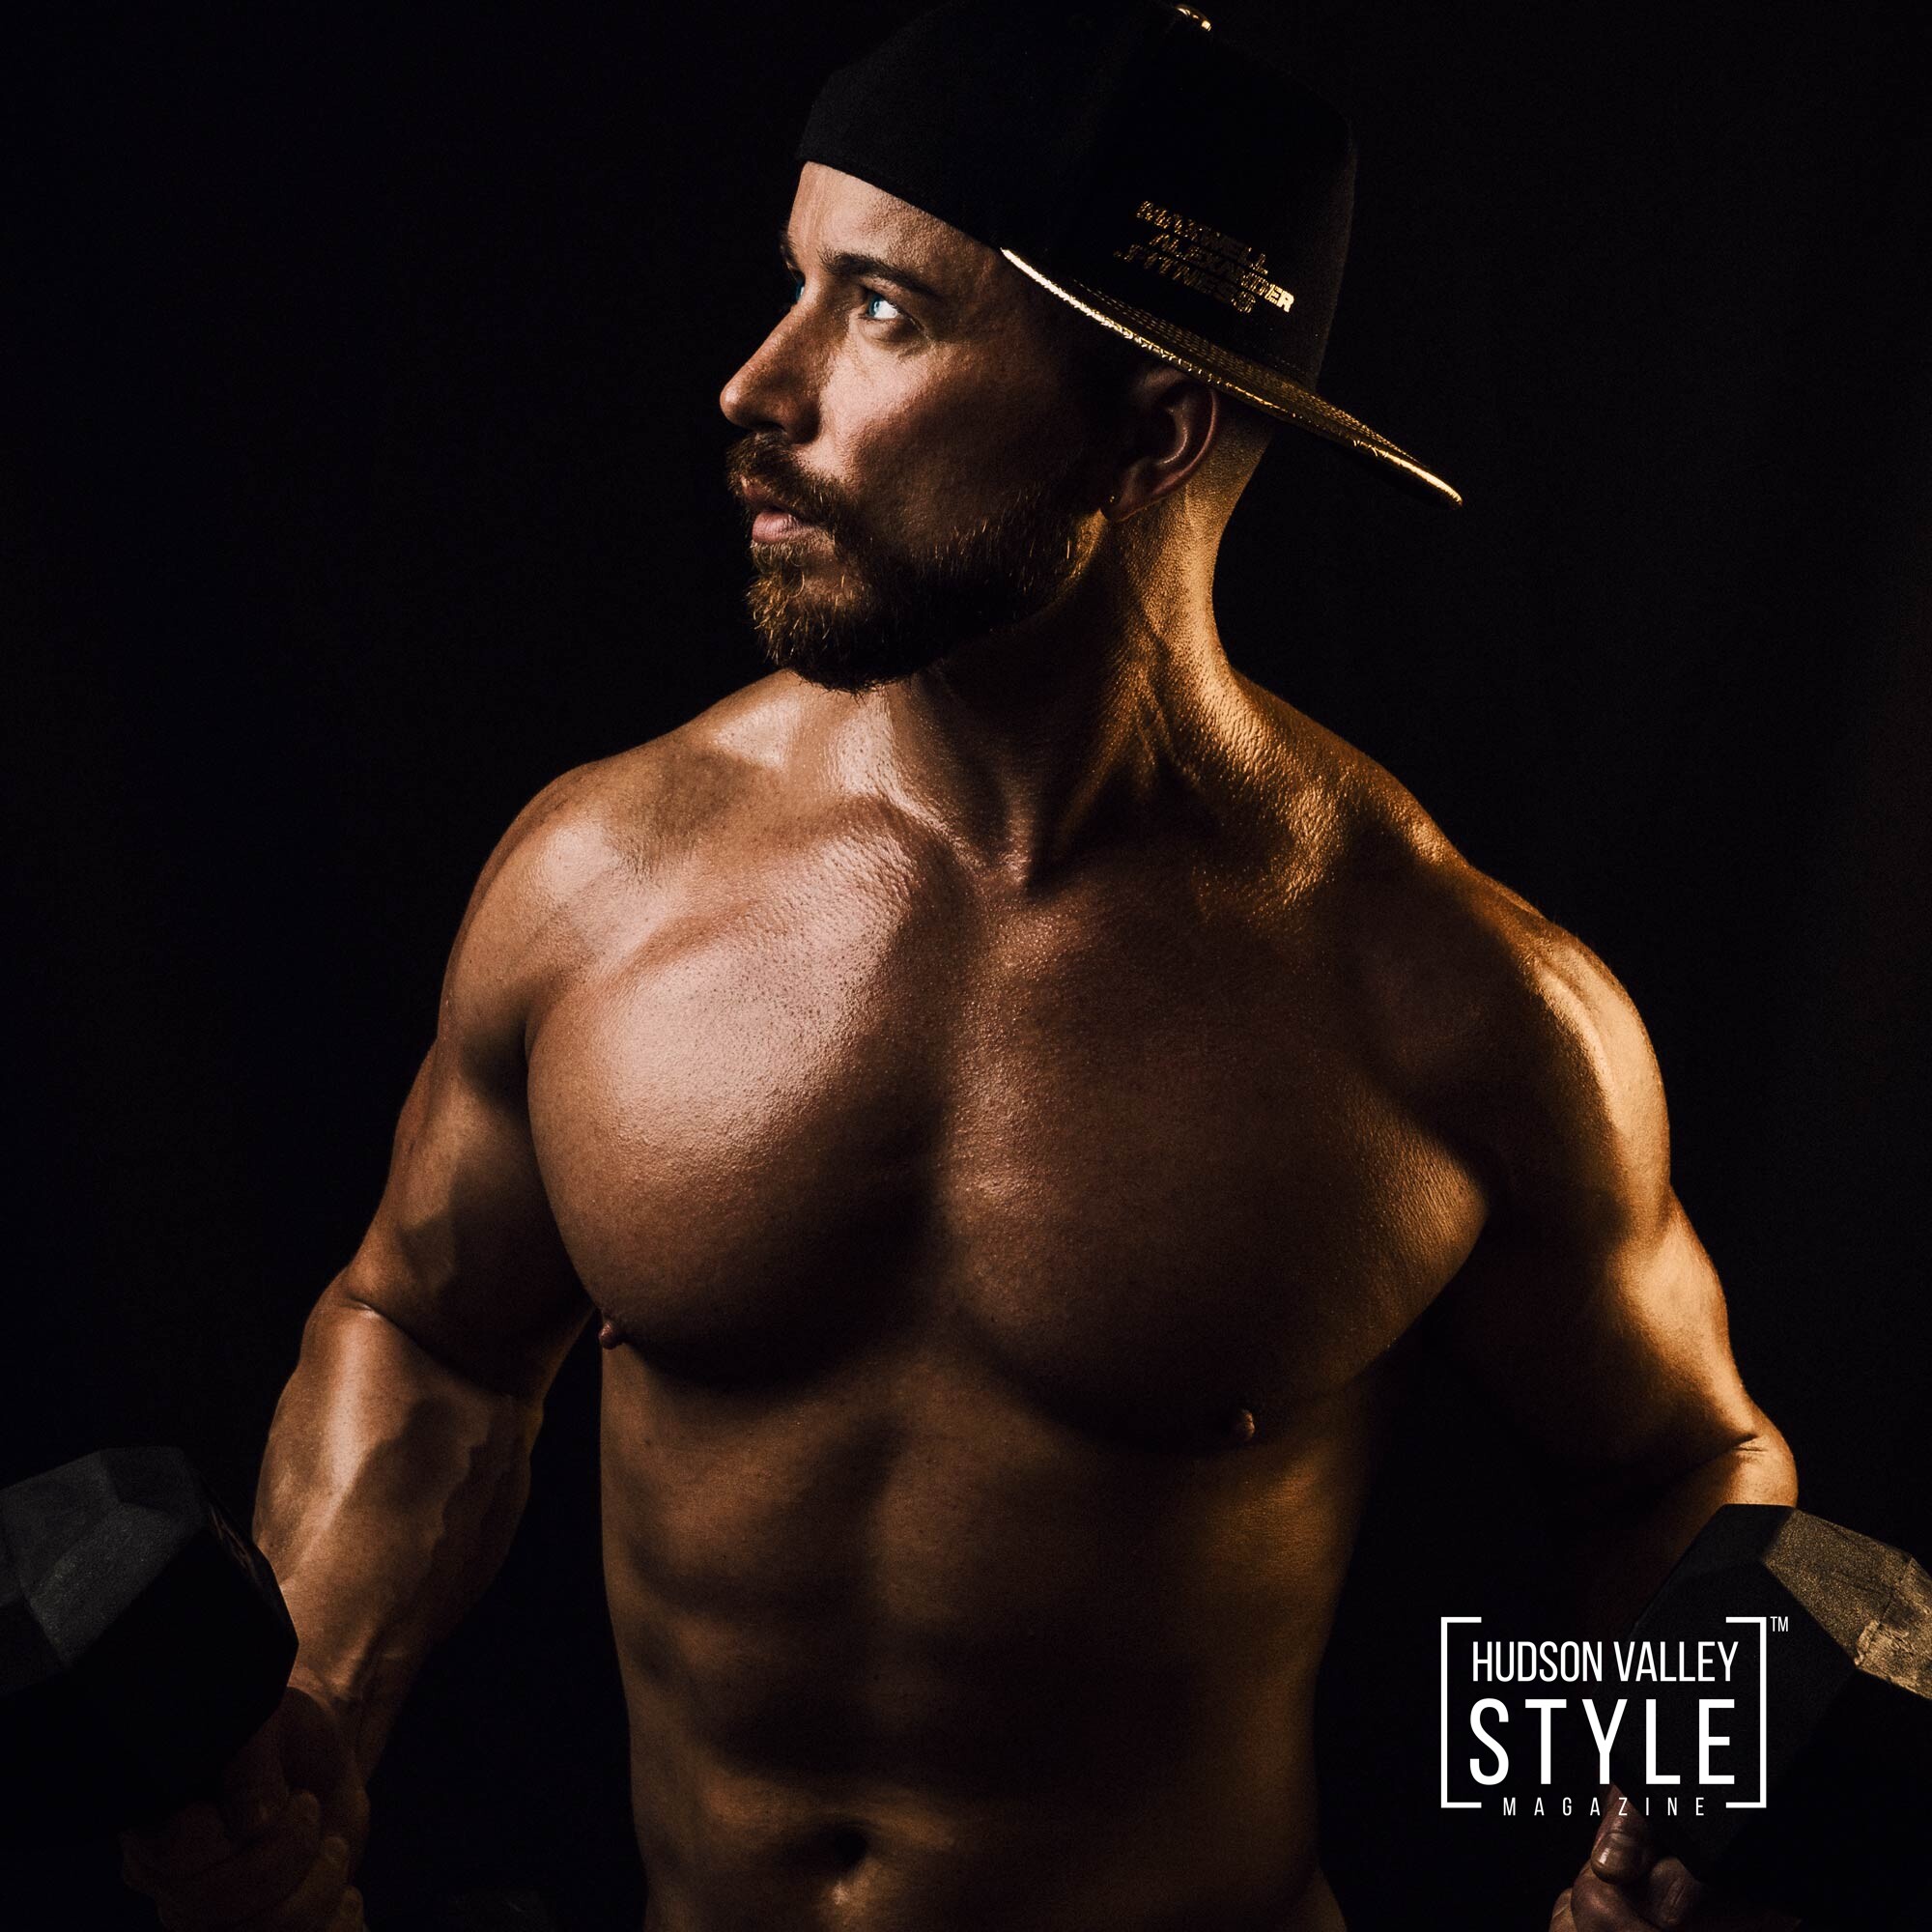 Fitness and Bodybuilding Lifestyle Photography by Maxwell Alexander, New York, NYC, Hudson Valley